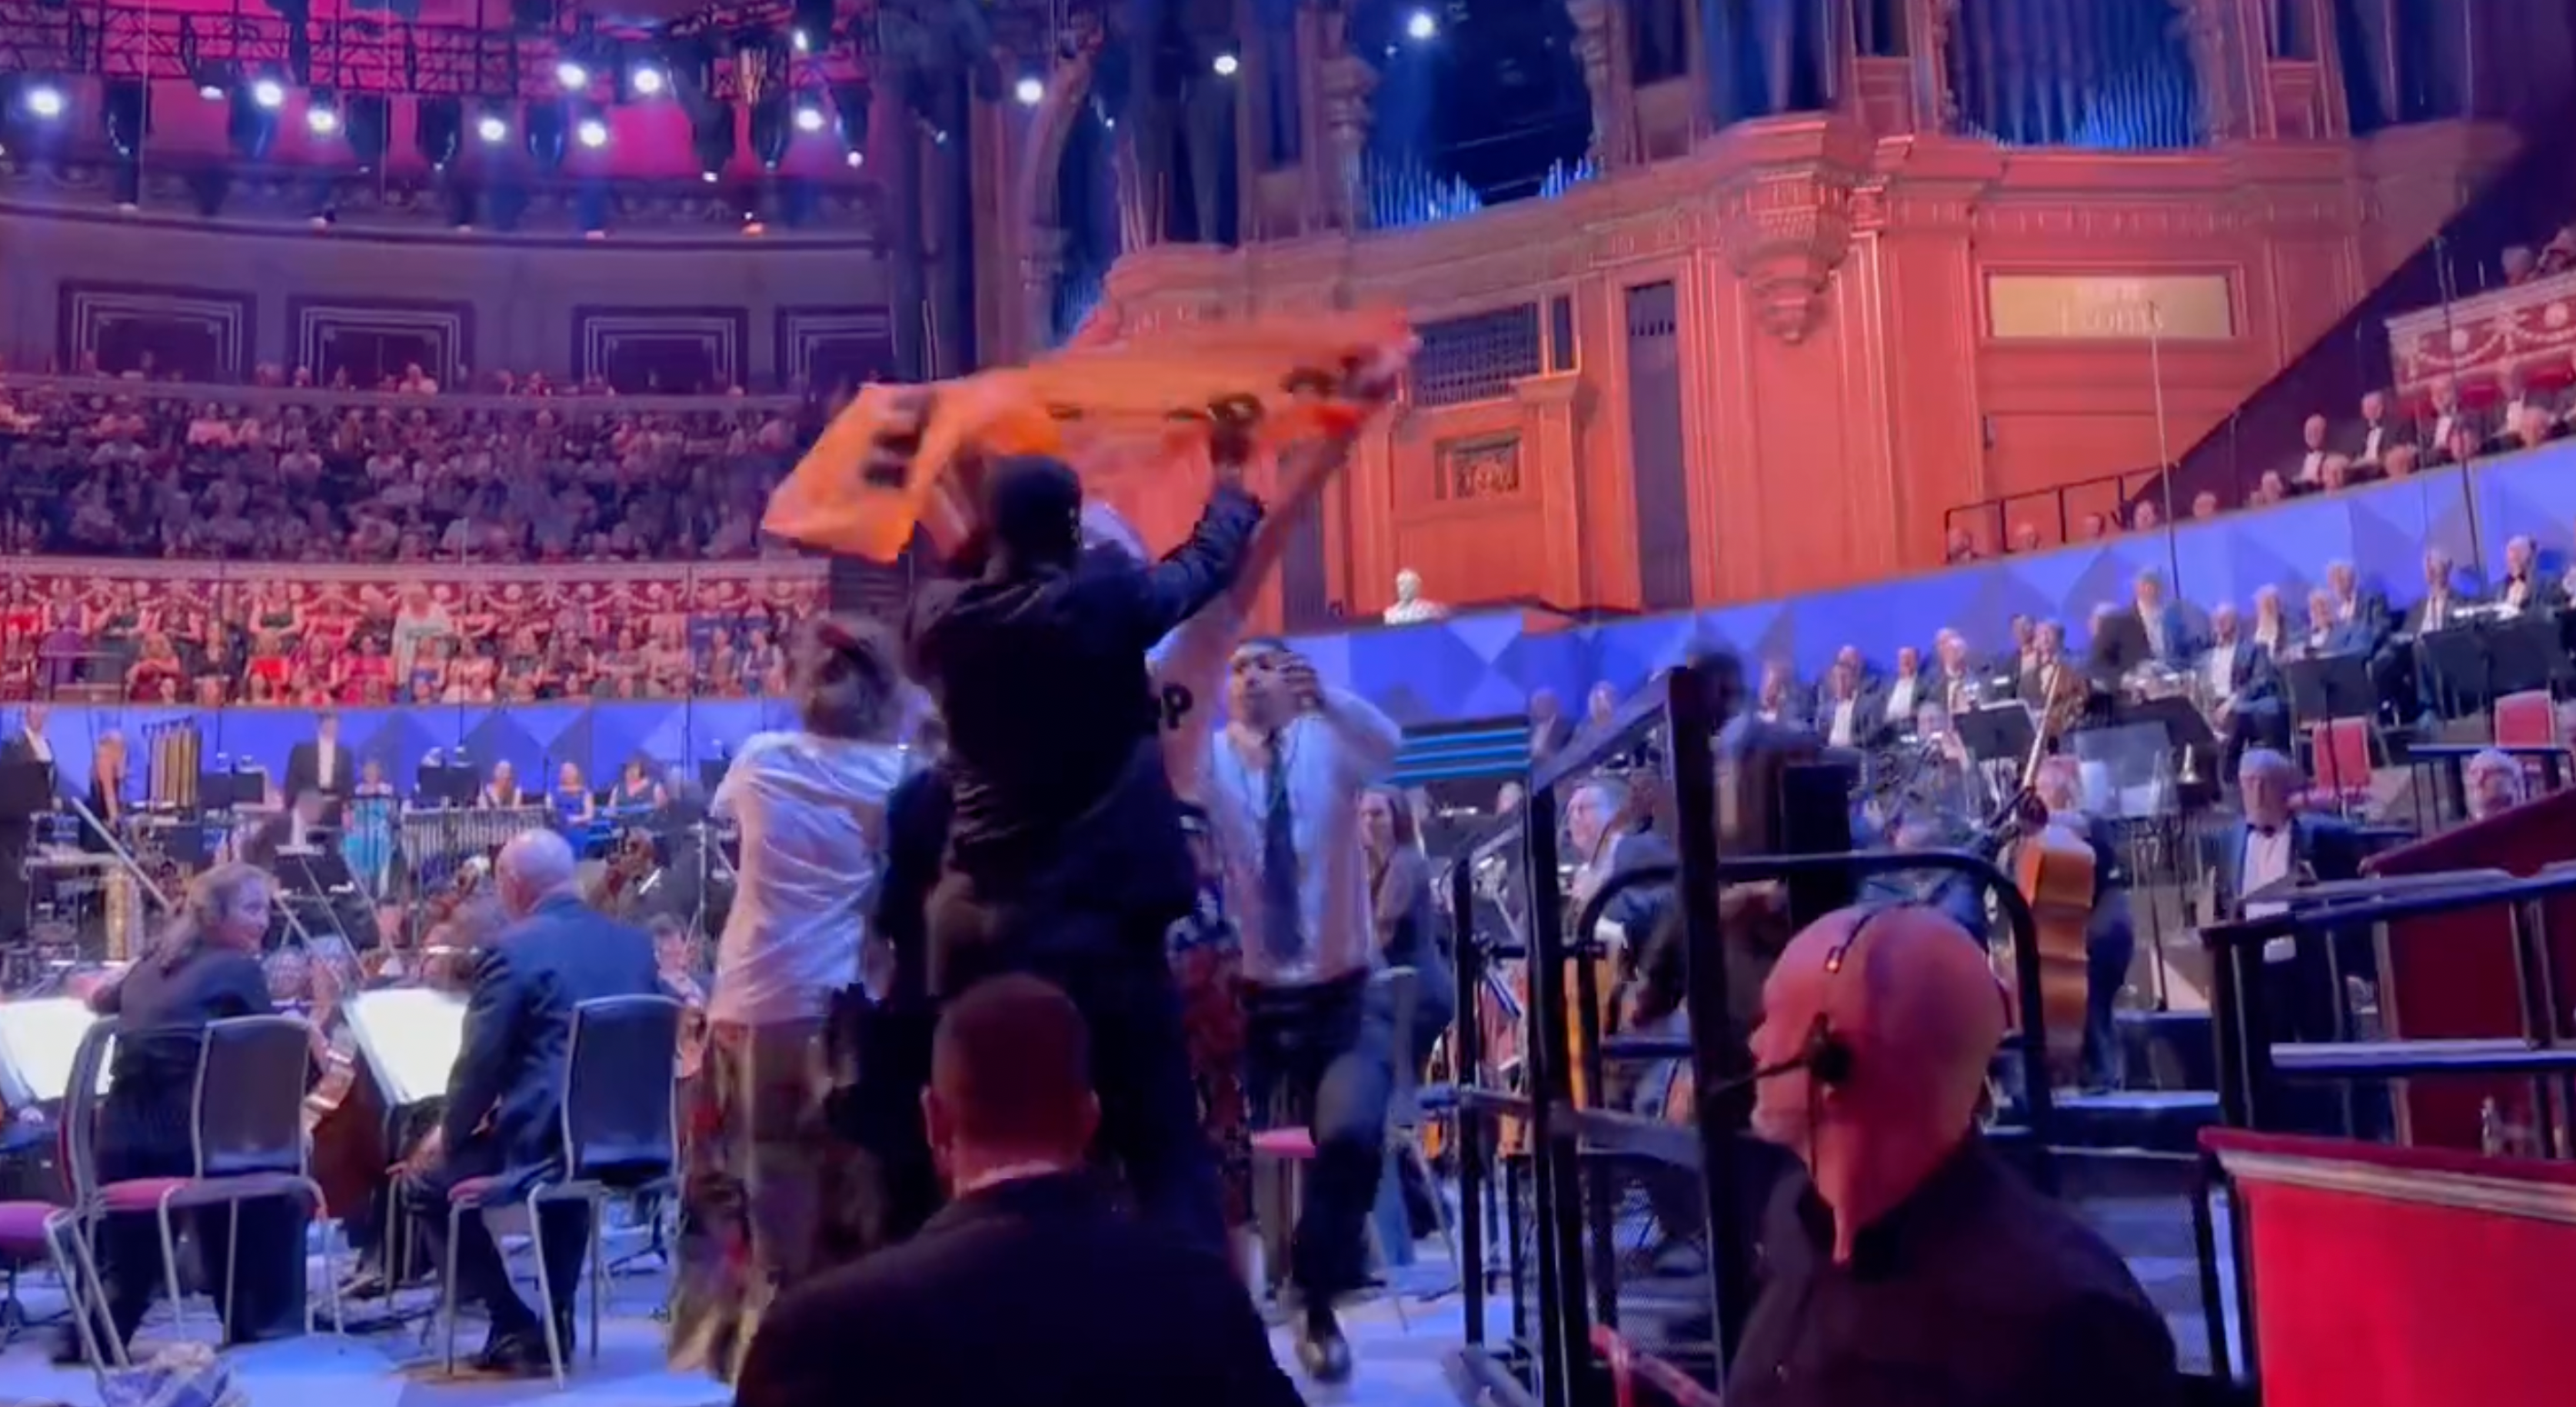 Security staff were seen removing the campaigners from the BBC Proms stage at the Royal Albert Hall on Friday